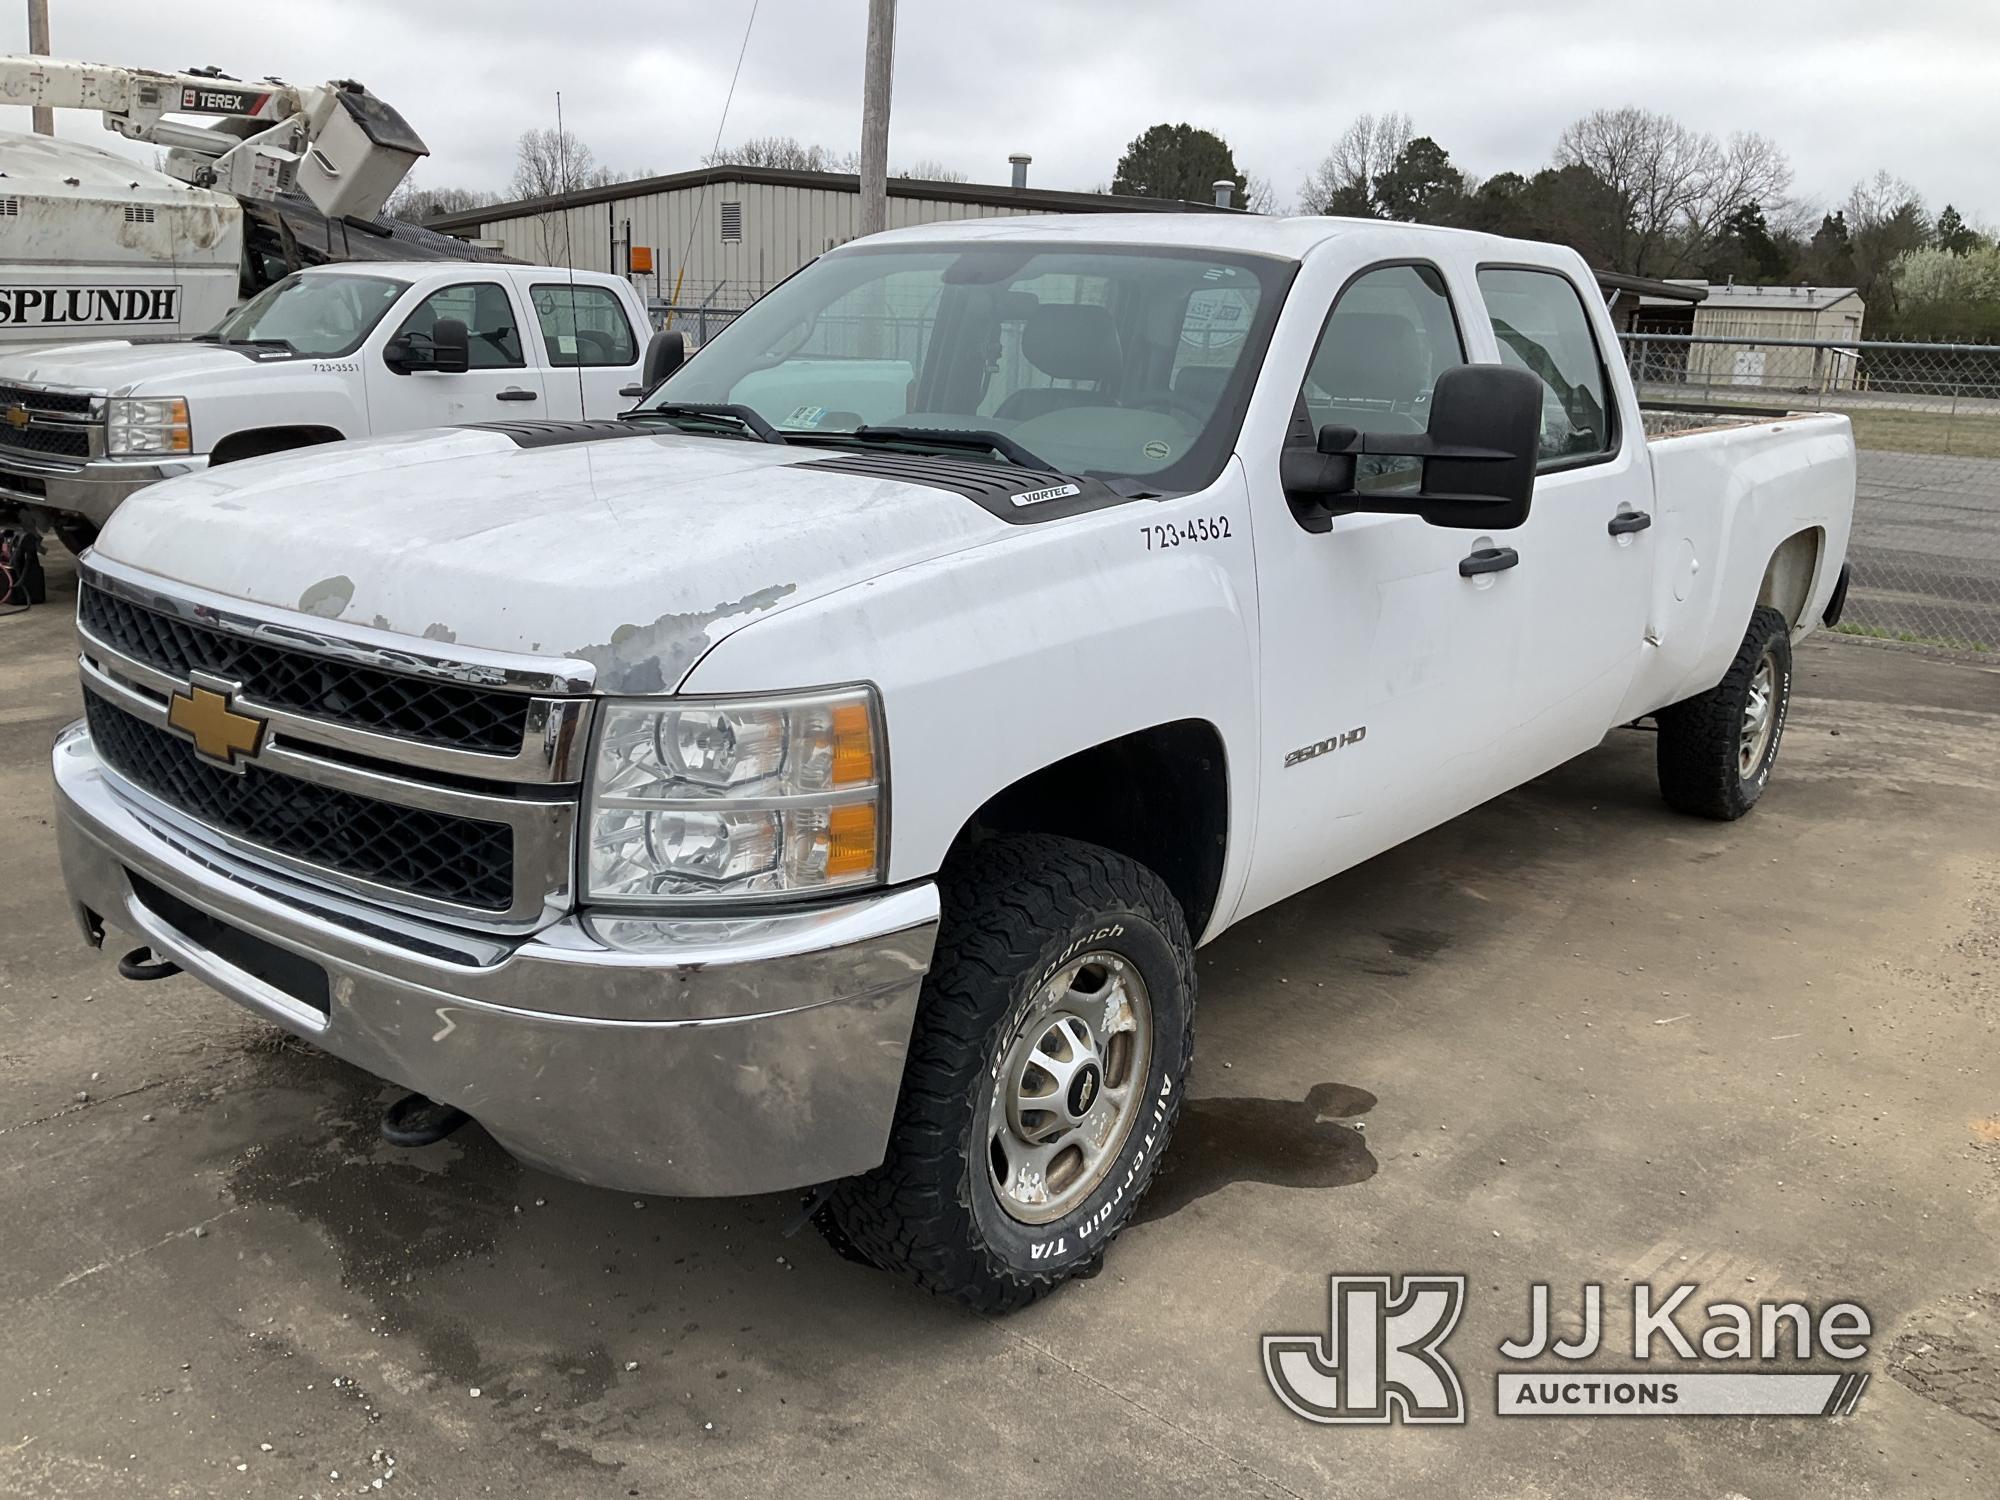 (Conway, AR) 2014 Chevrolet Silverado 2500HD 4x4 Crew-Cab Pickup Truck Not Running, Condition Unknow